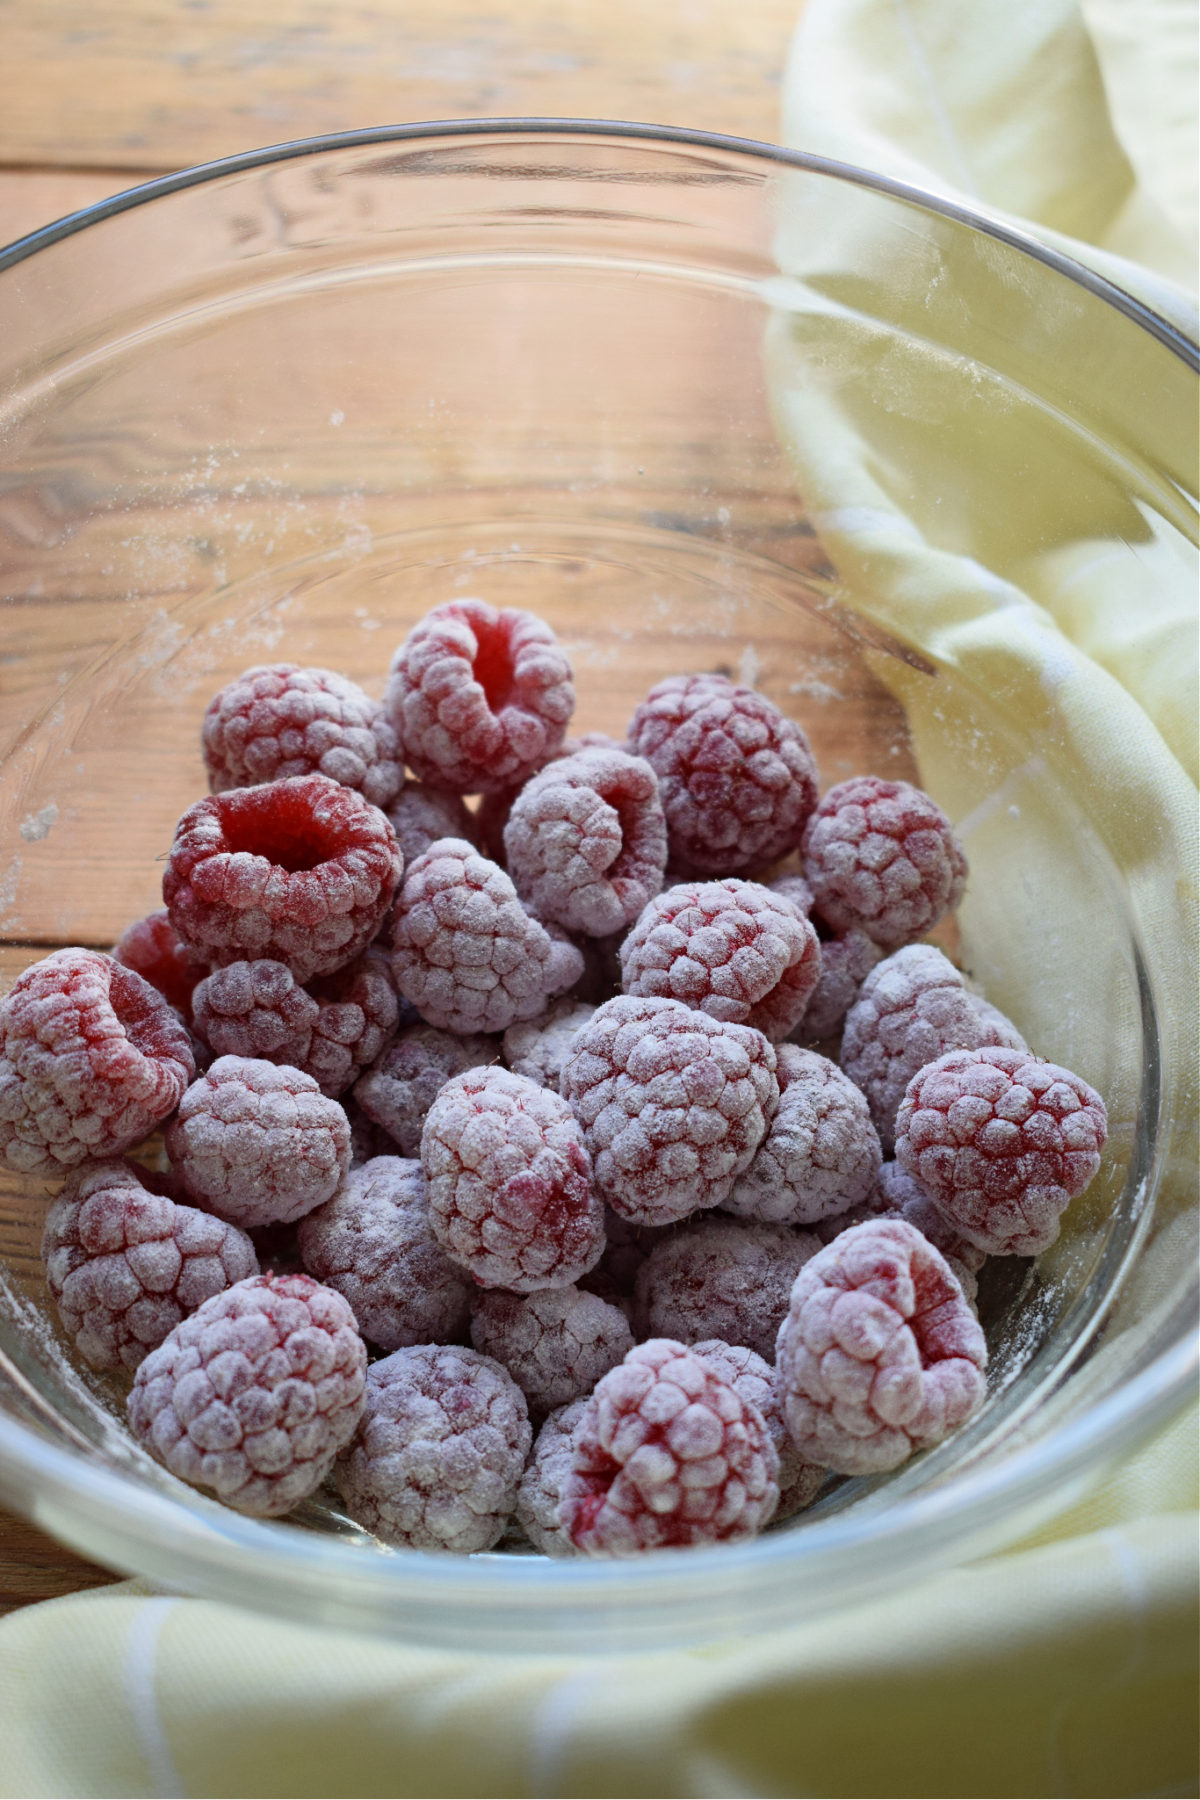 FRESH RASPBERRIES IN A BOWL DUSTED WITH FLOUR